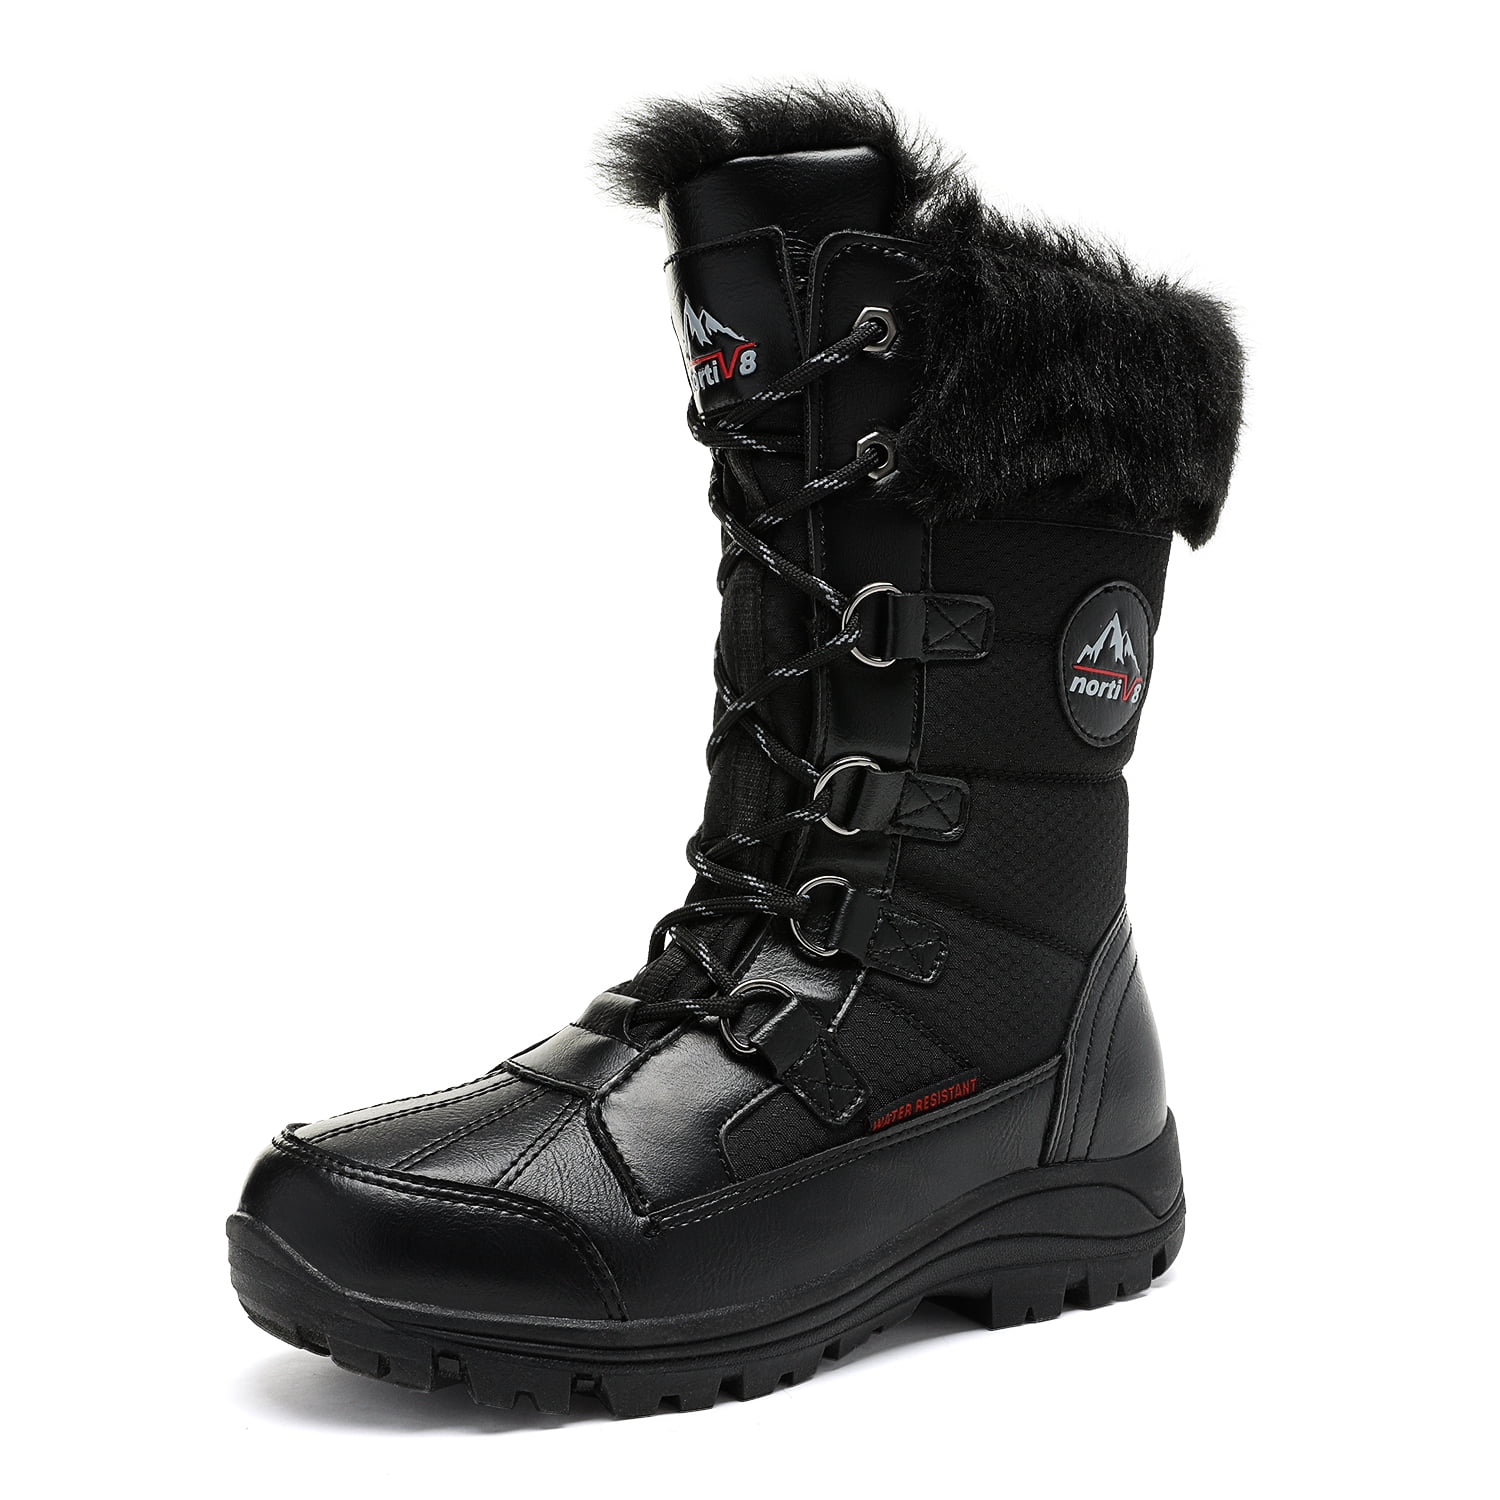 NORTIV 8 Womens Insulated Warm Snow Winter Boots